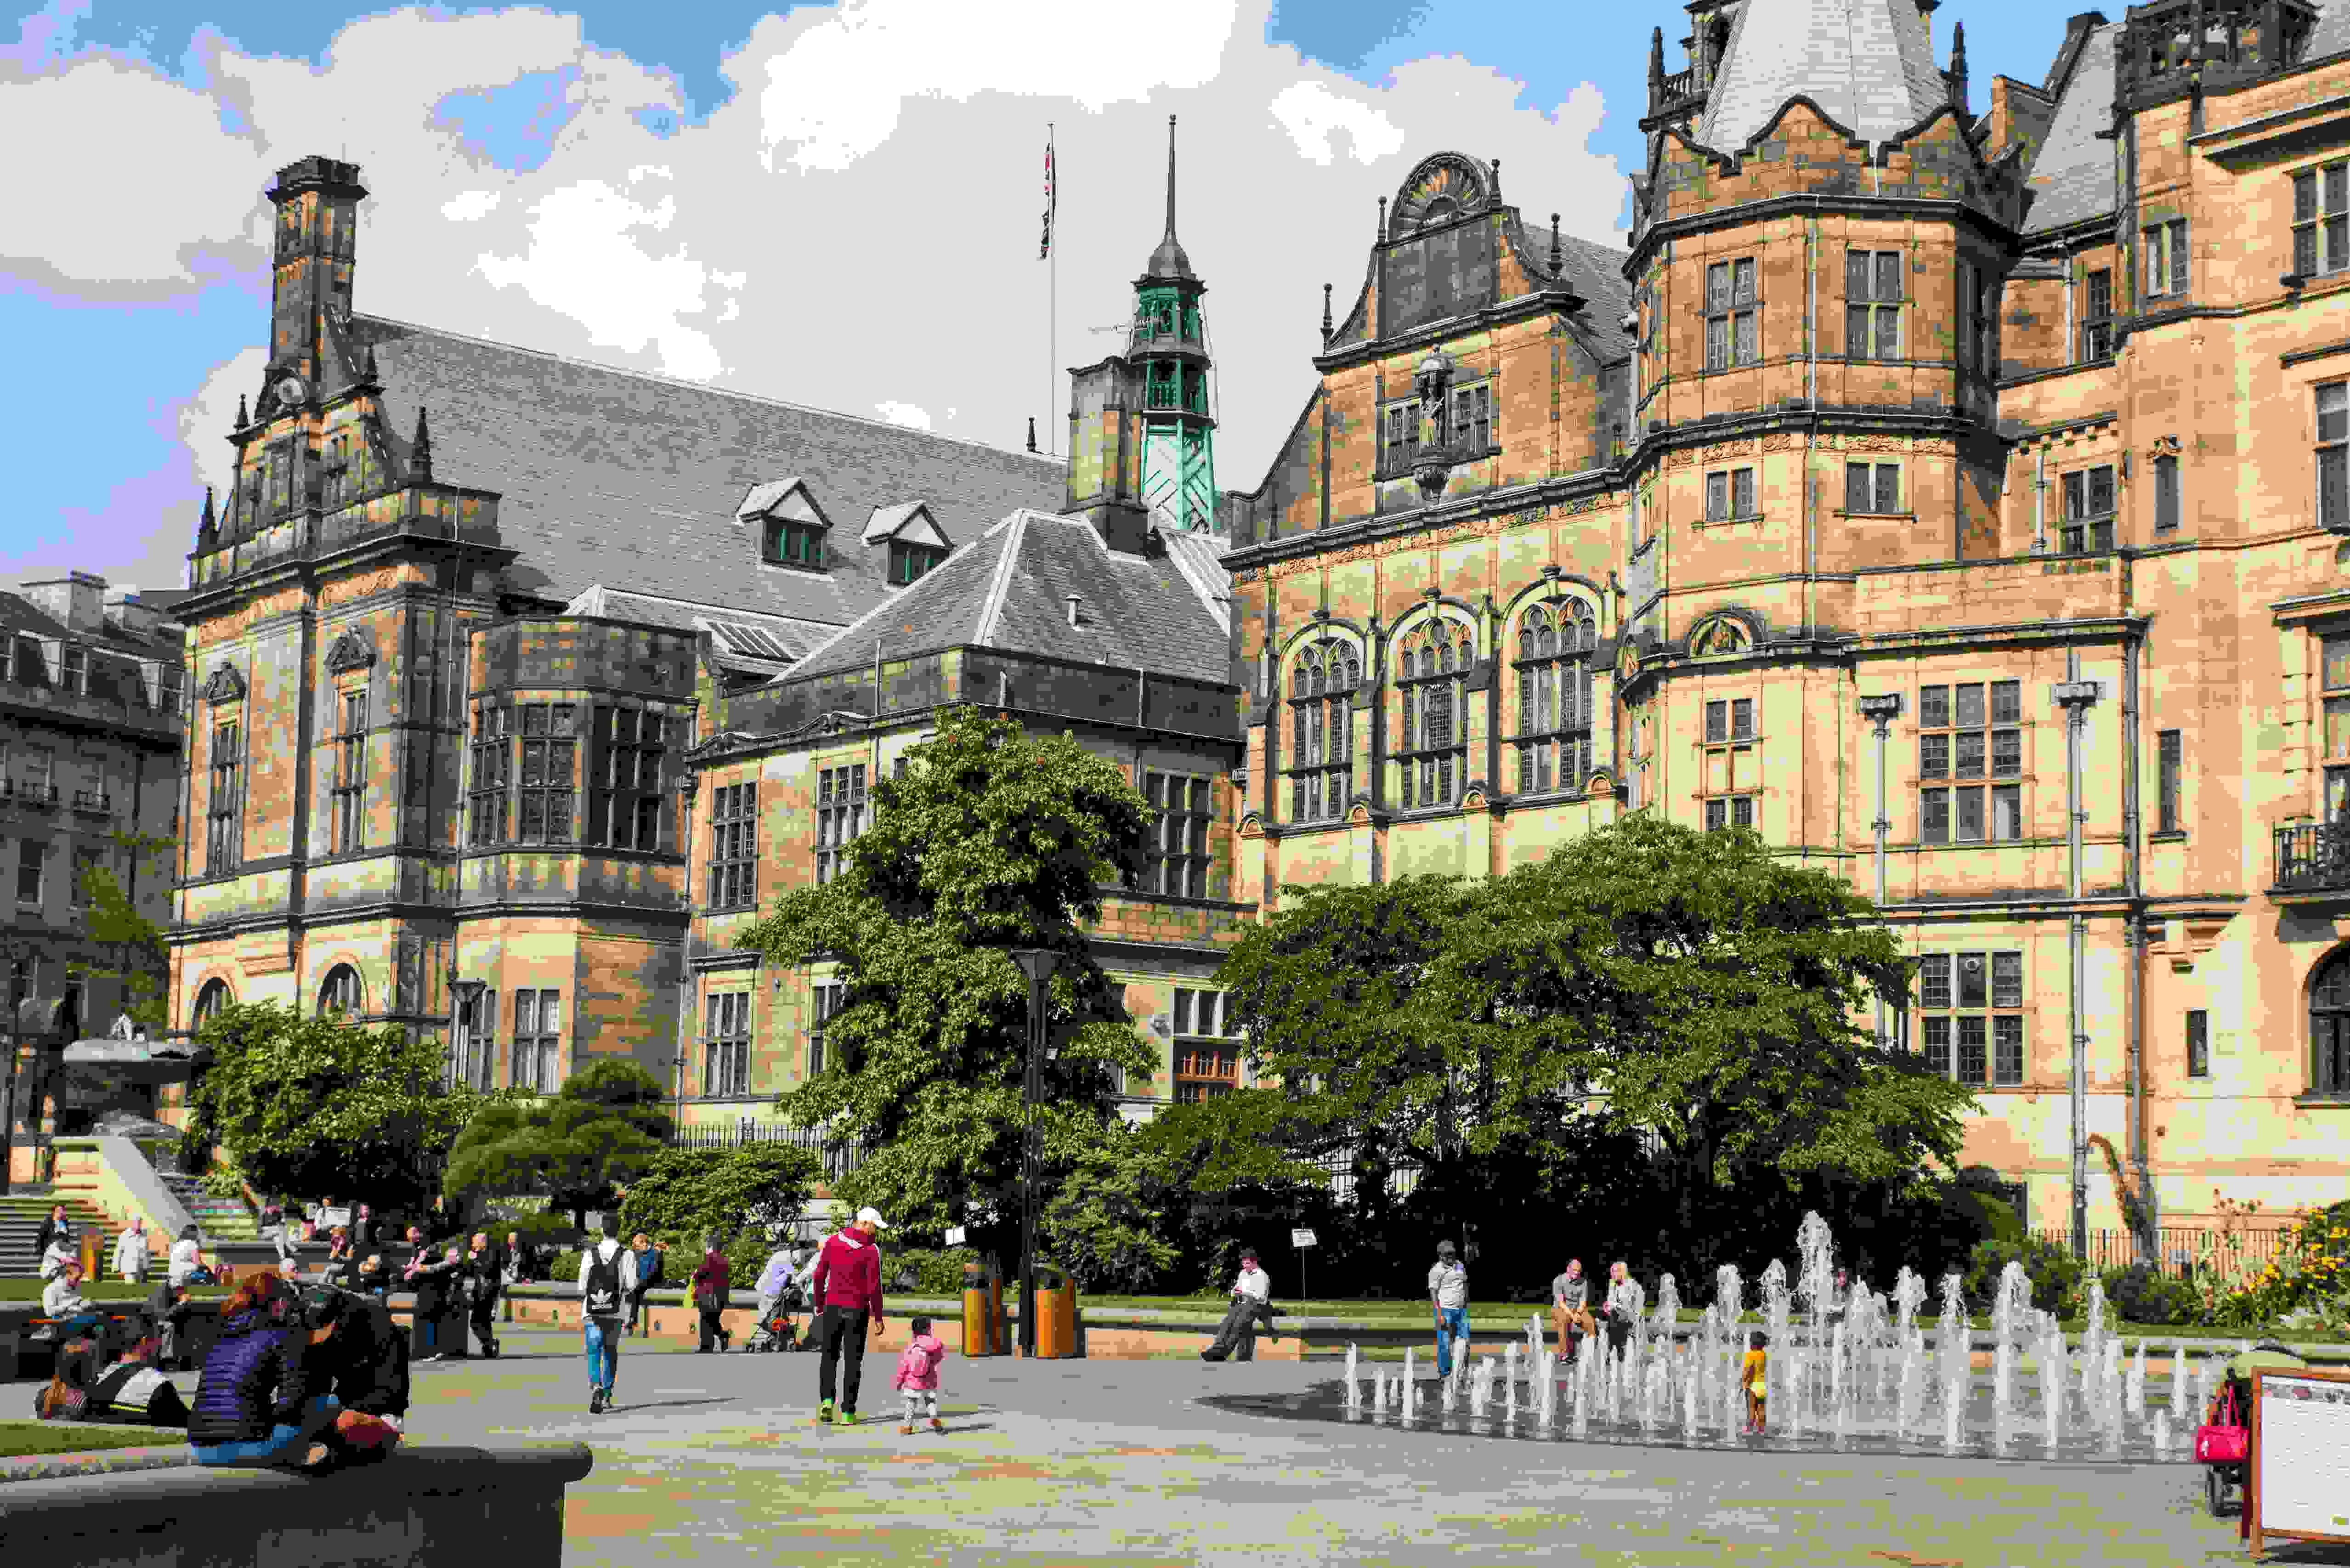 Town Hall and Peace Gardens, fountain on, people walking through the gardens